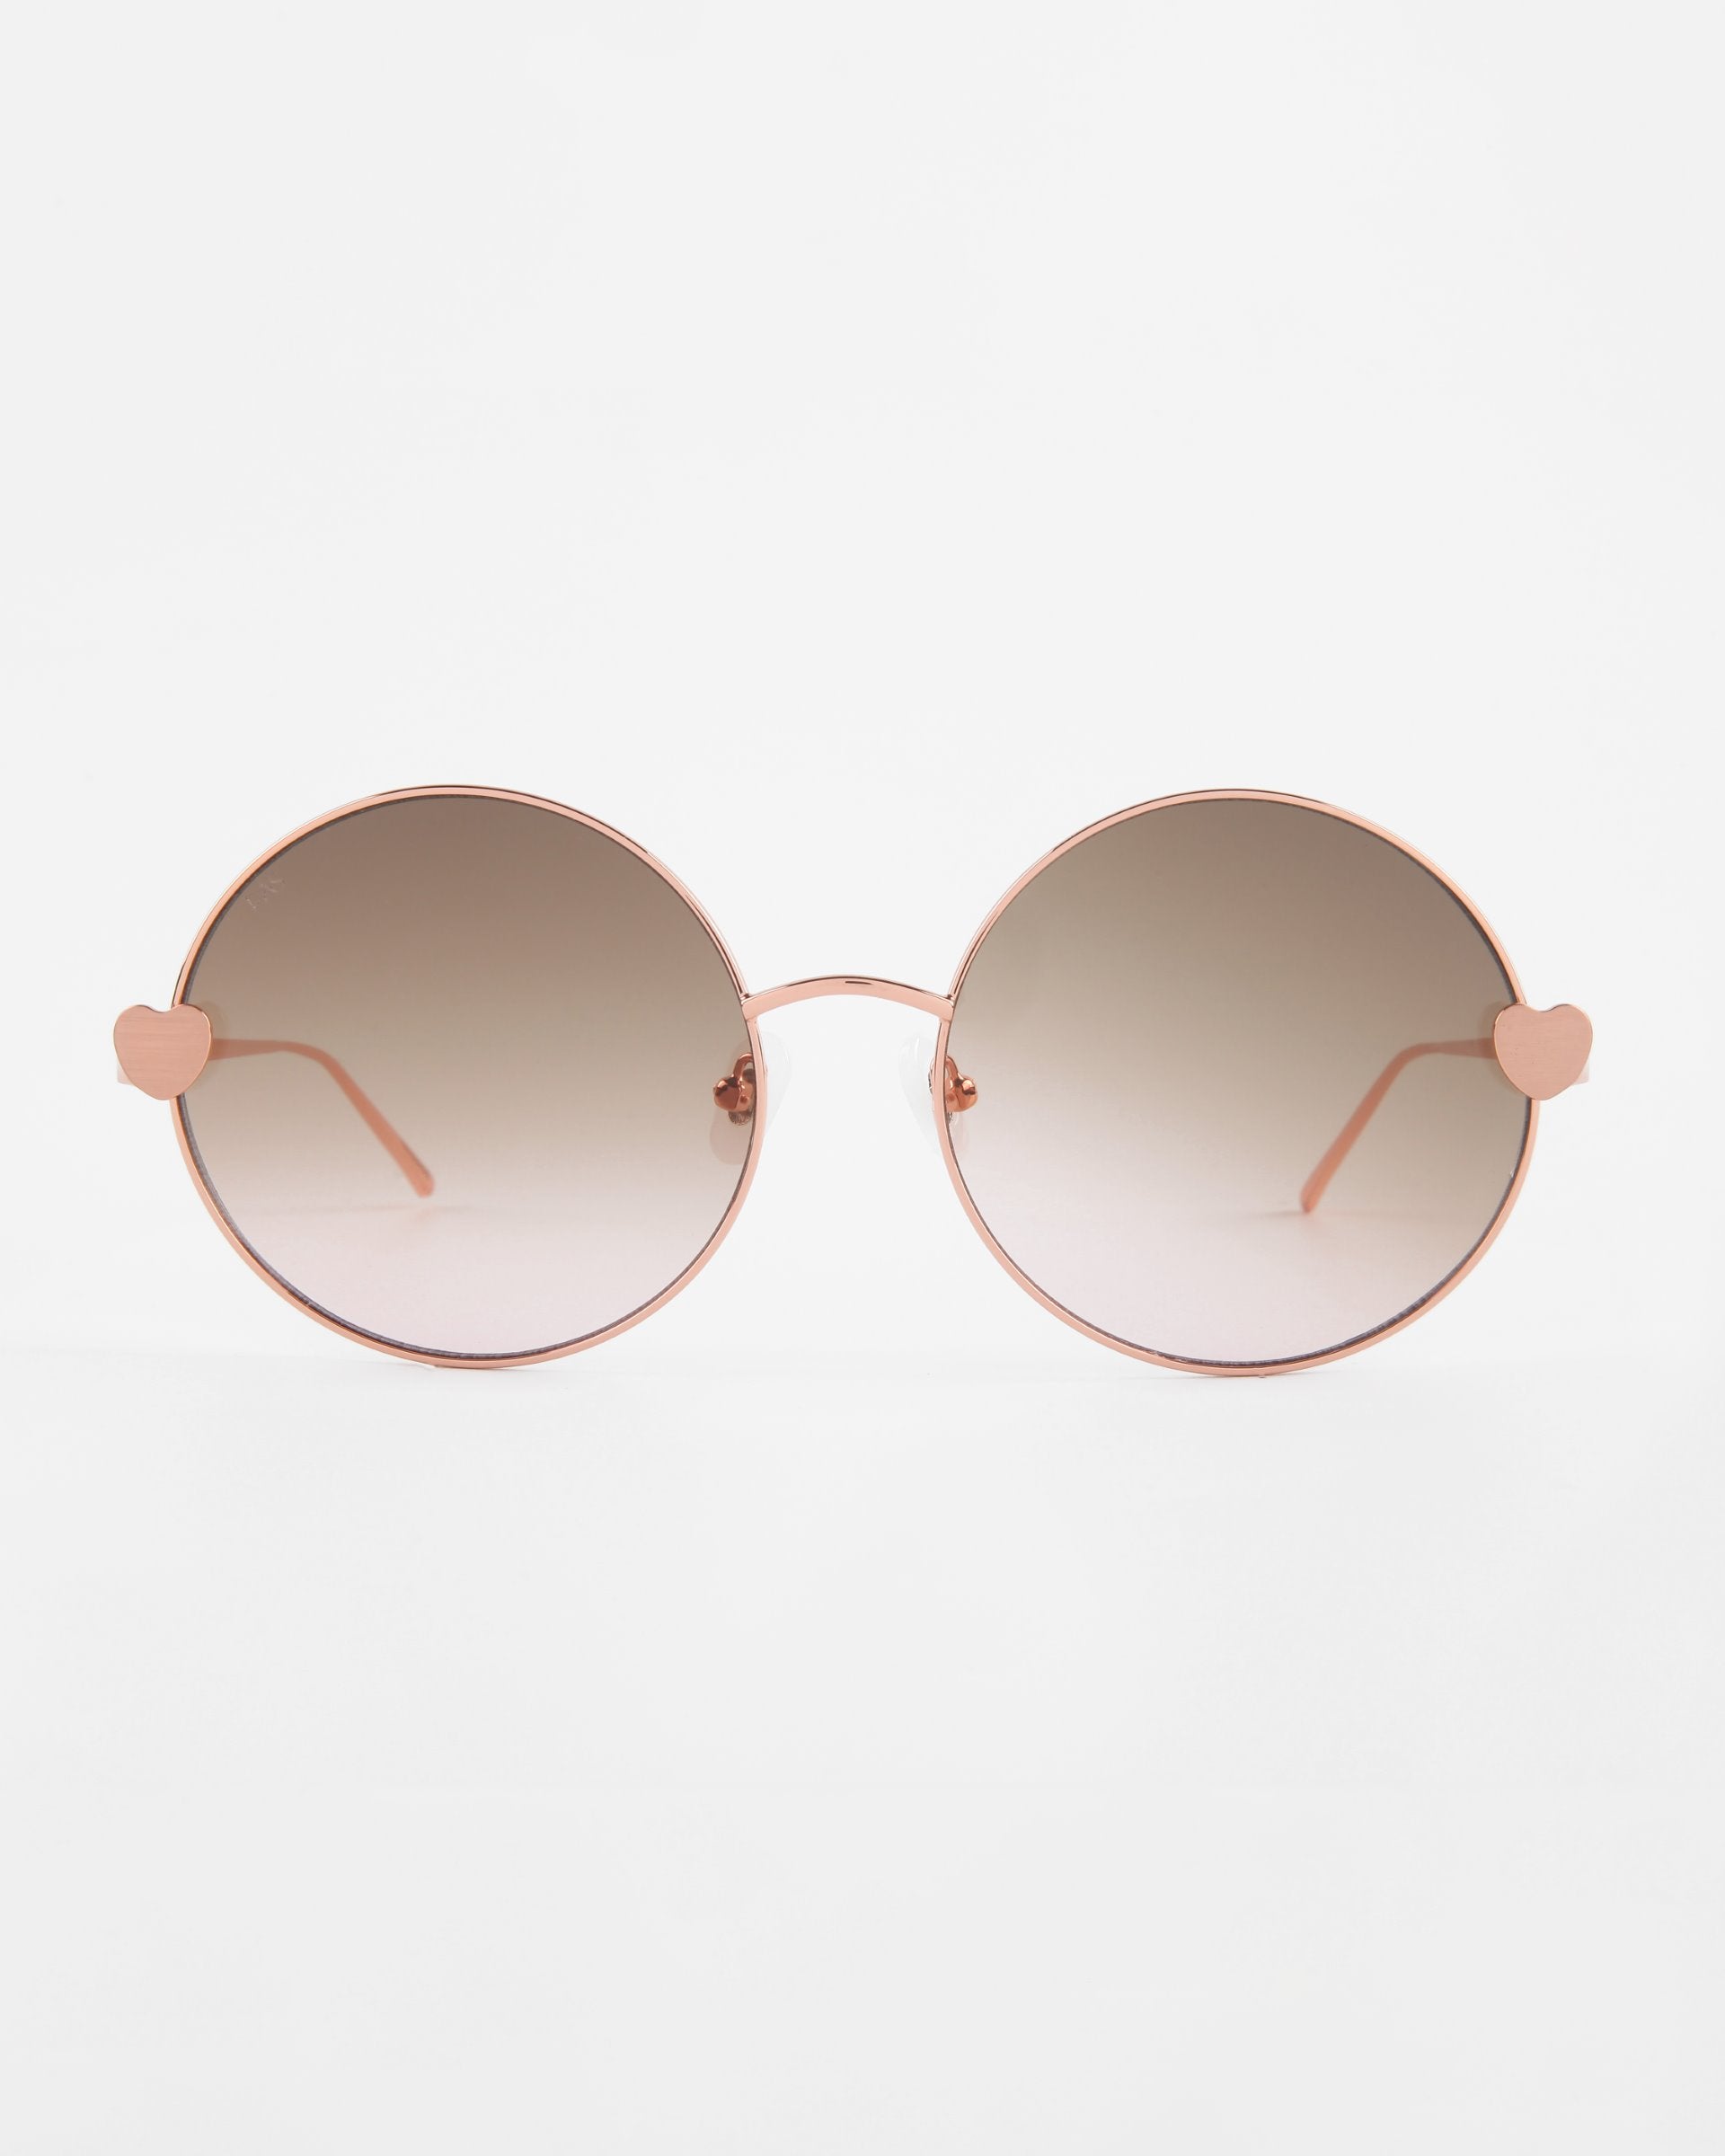 A pair of round, gradient-tinted **Love Story** shades from **For Art&#39;s Sake®** with thin, rose-gold frames. The temples feature small, heart-shaped decorations near the lenses and jadestone nose pads. The background is plain white, ensuring they stand out while offering 100% UV protection.